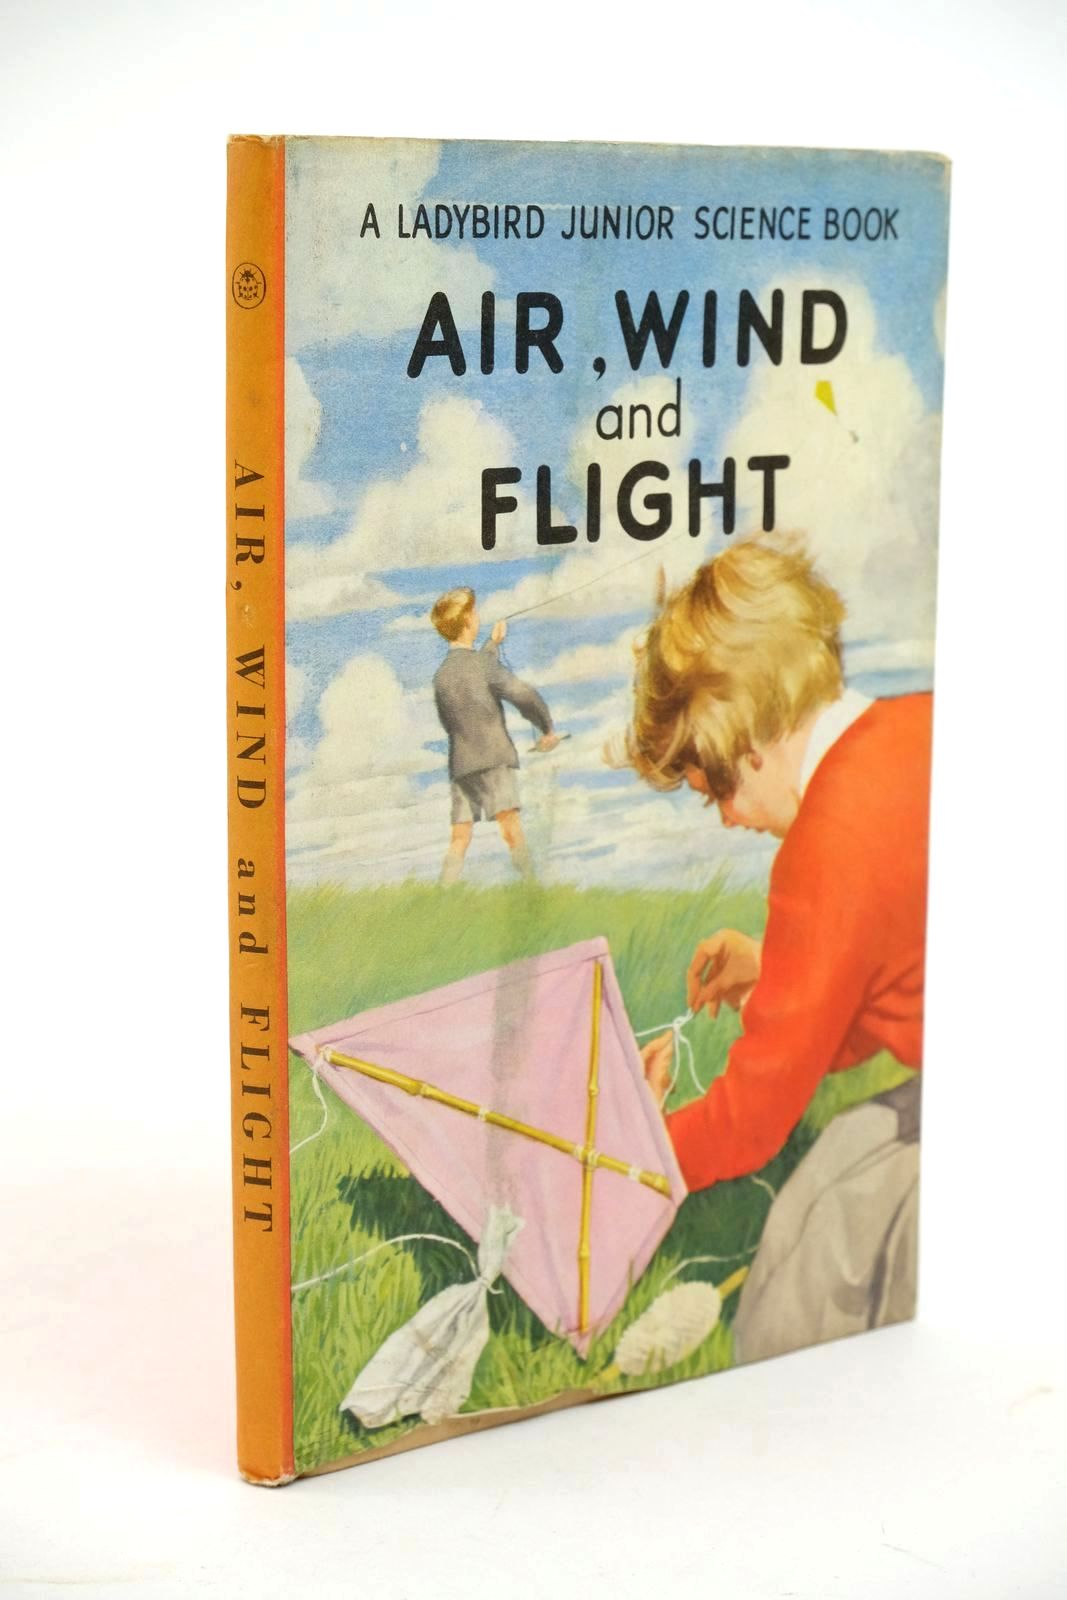 Photo of AIR, WIND AND FLIGHT written by Newing, F.E.
Bowood, Richard illustrated by Wingfield, J.H. published by Wills & Hepworth Ltd. (STOCK CODE: 1323151)  for sale by Stella & Rose's Books